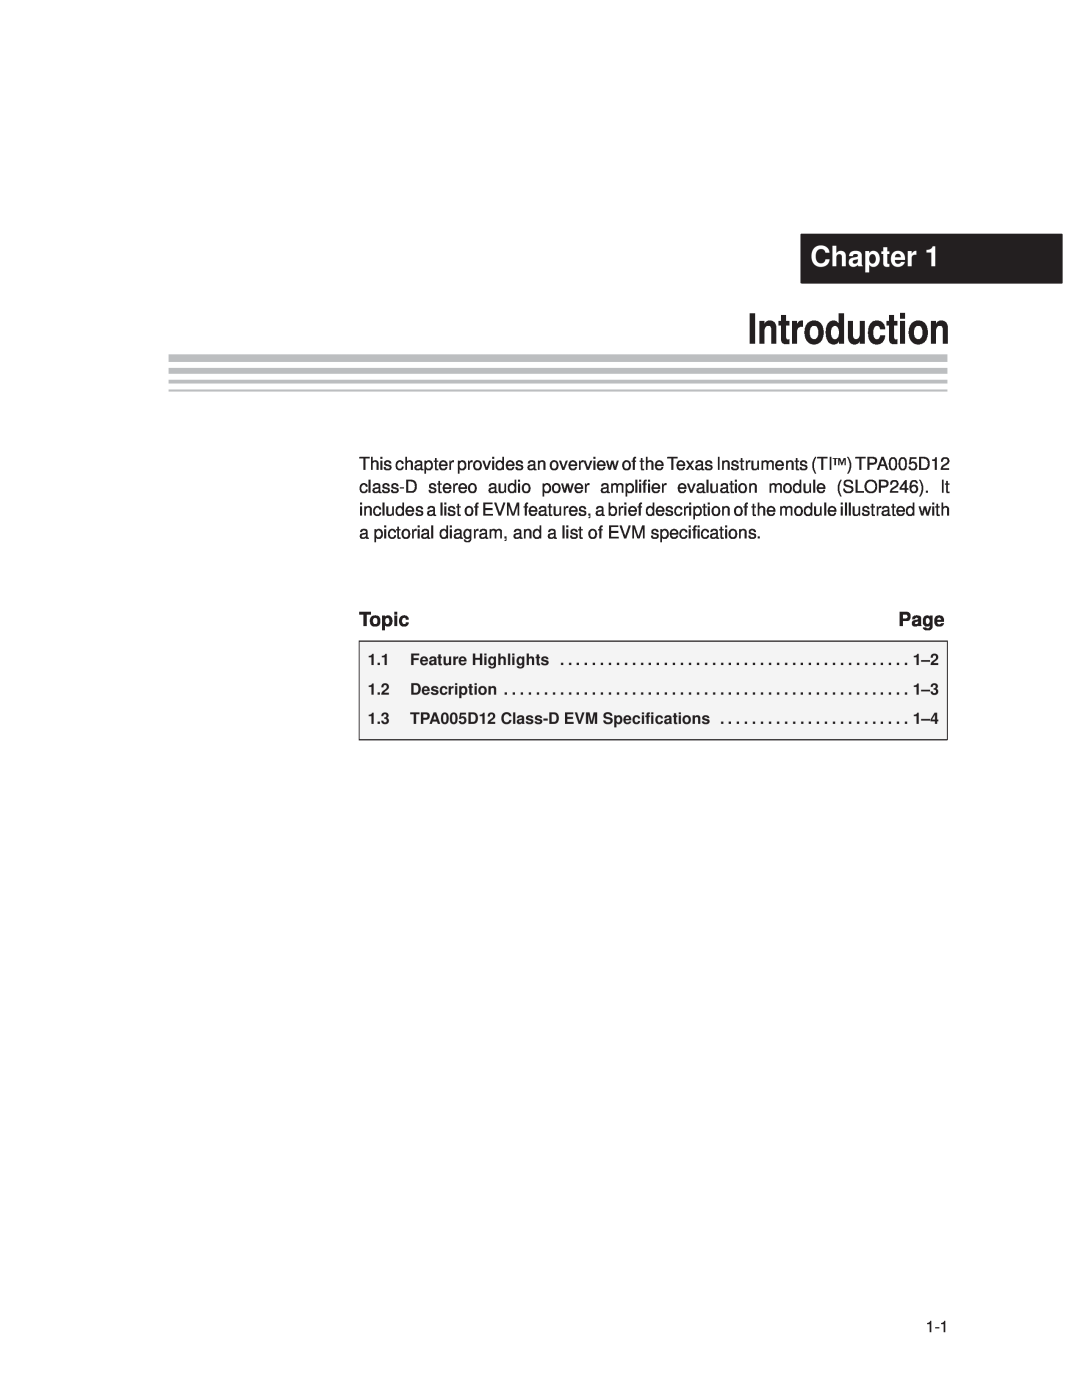 Texas Instruments TPA005D12 manual Introduction, Chapter, Page, Topic 